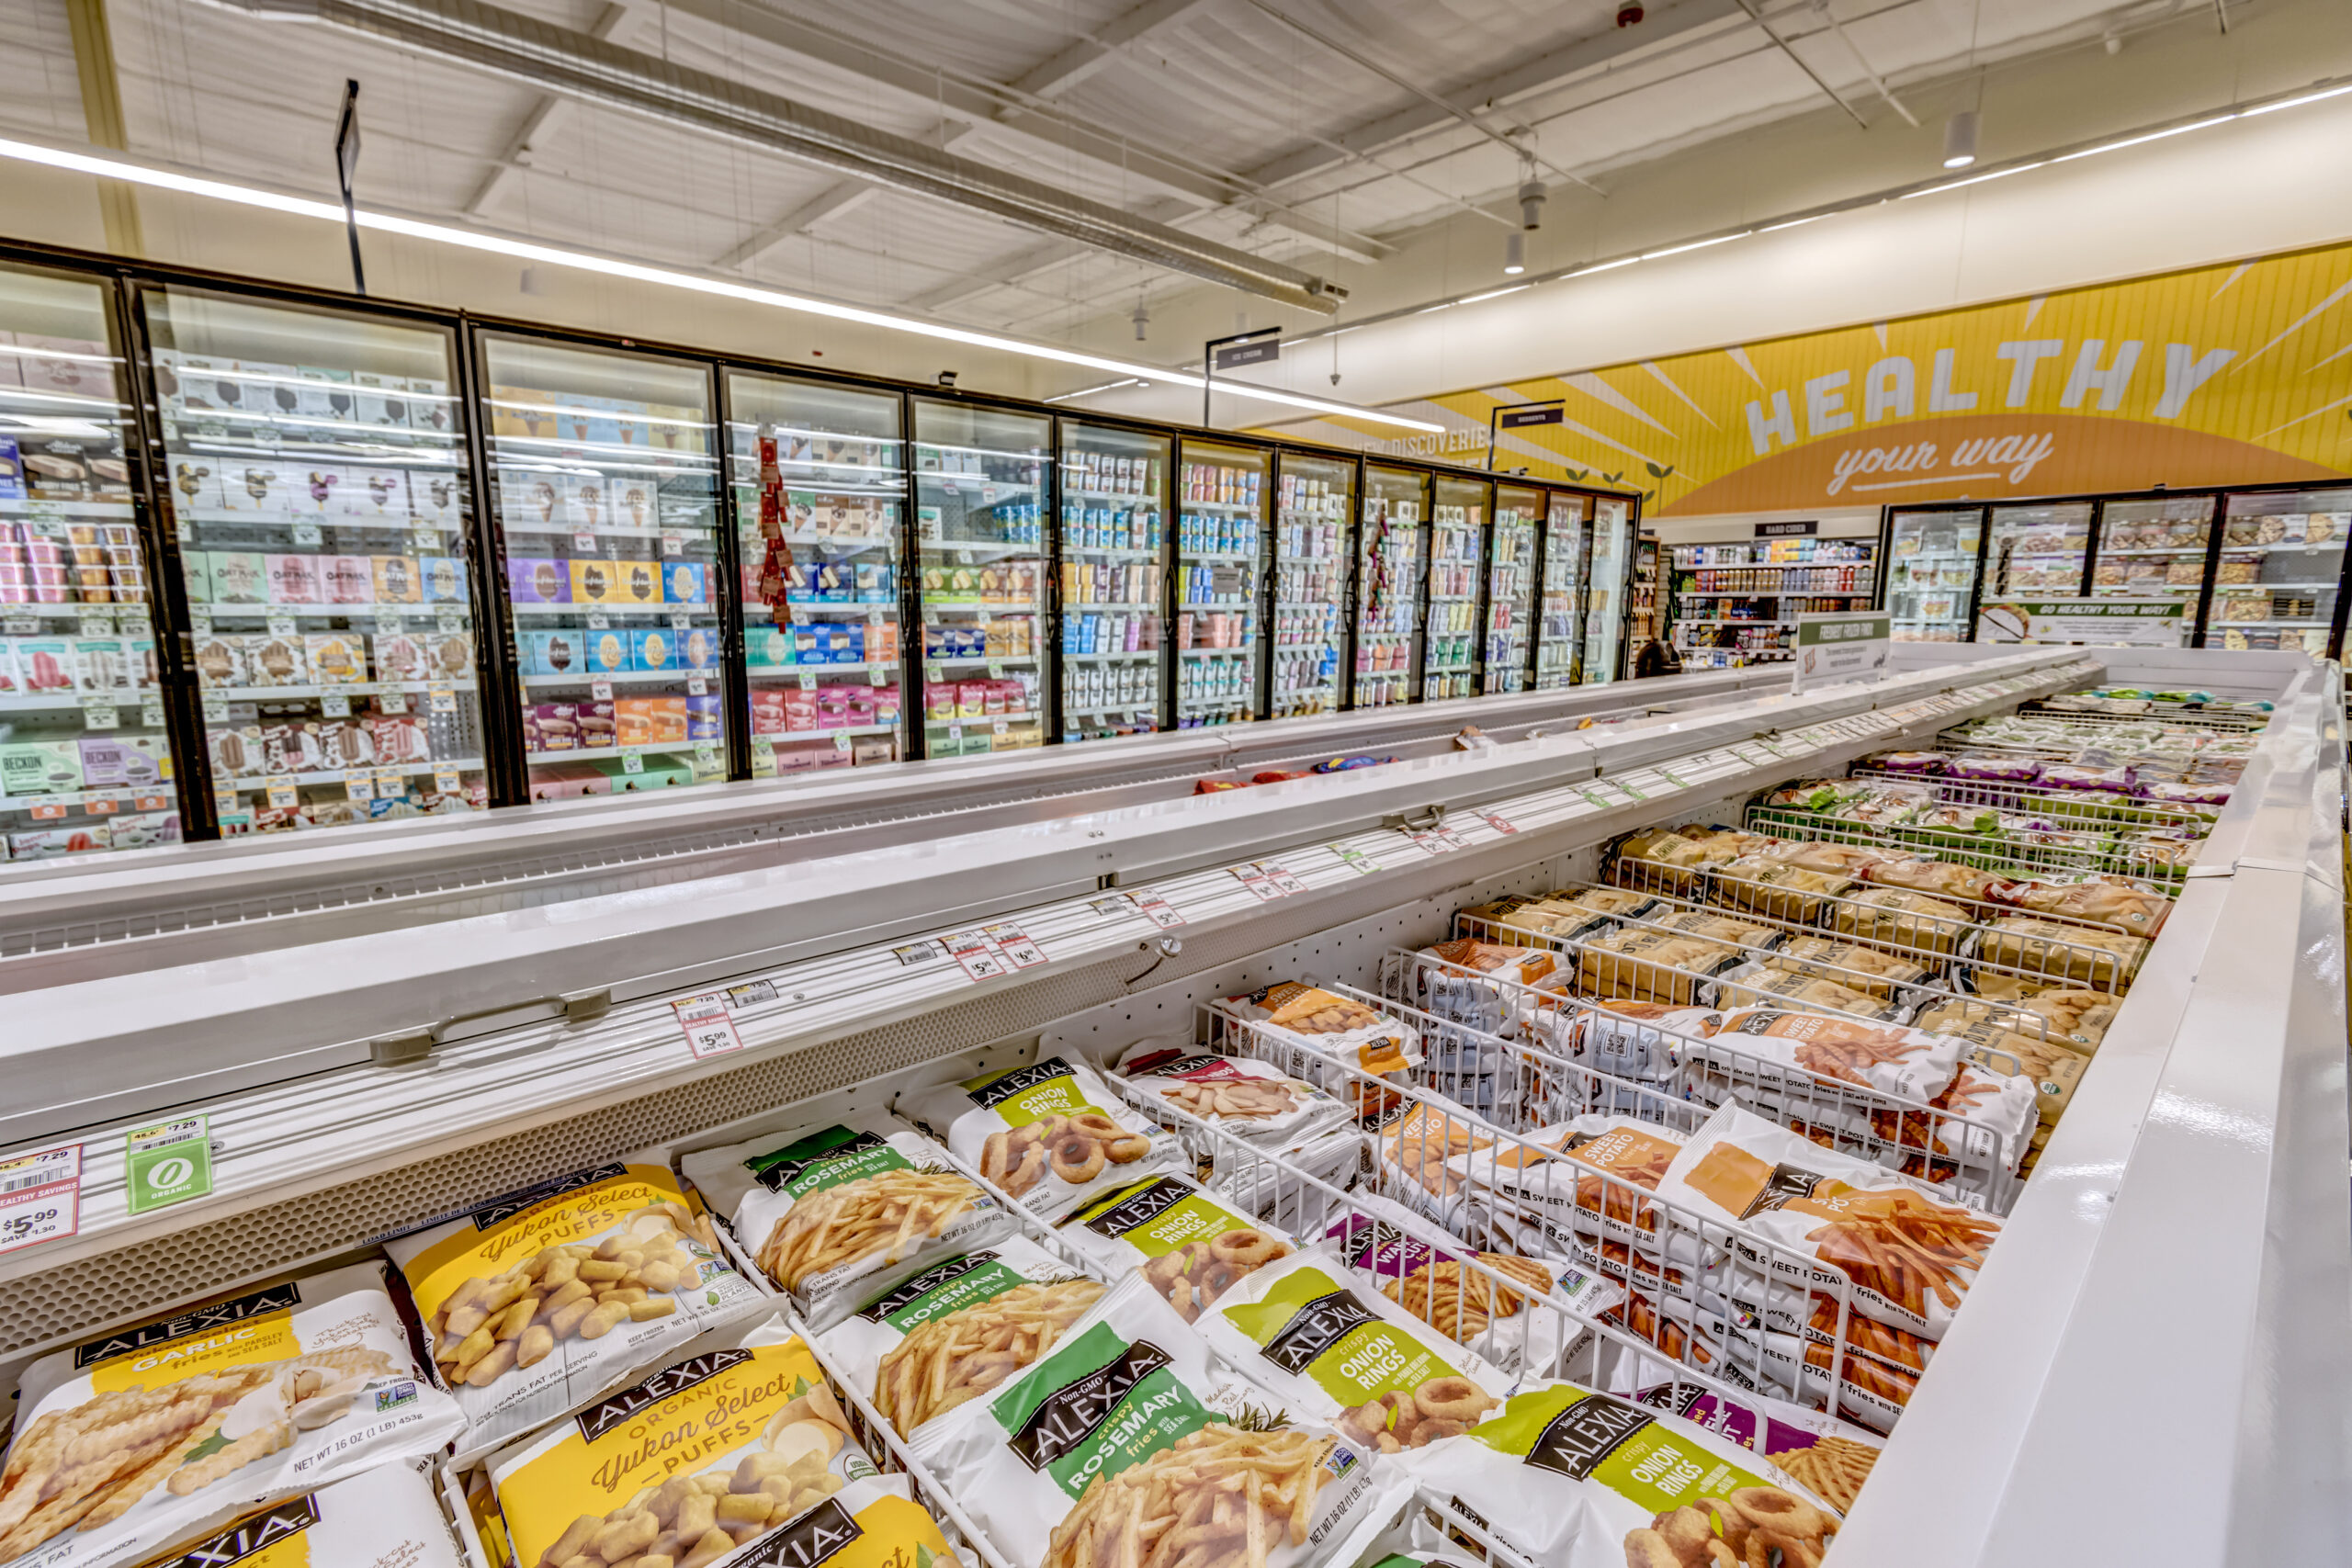 Frozen section of Sprouts Farmers Market, displaying frozen meals and refrigerated foods.